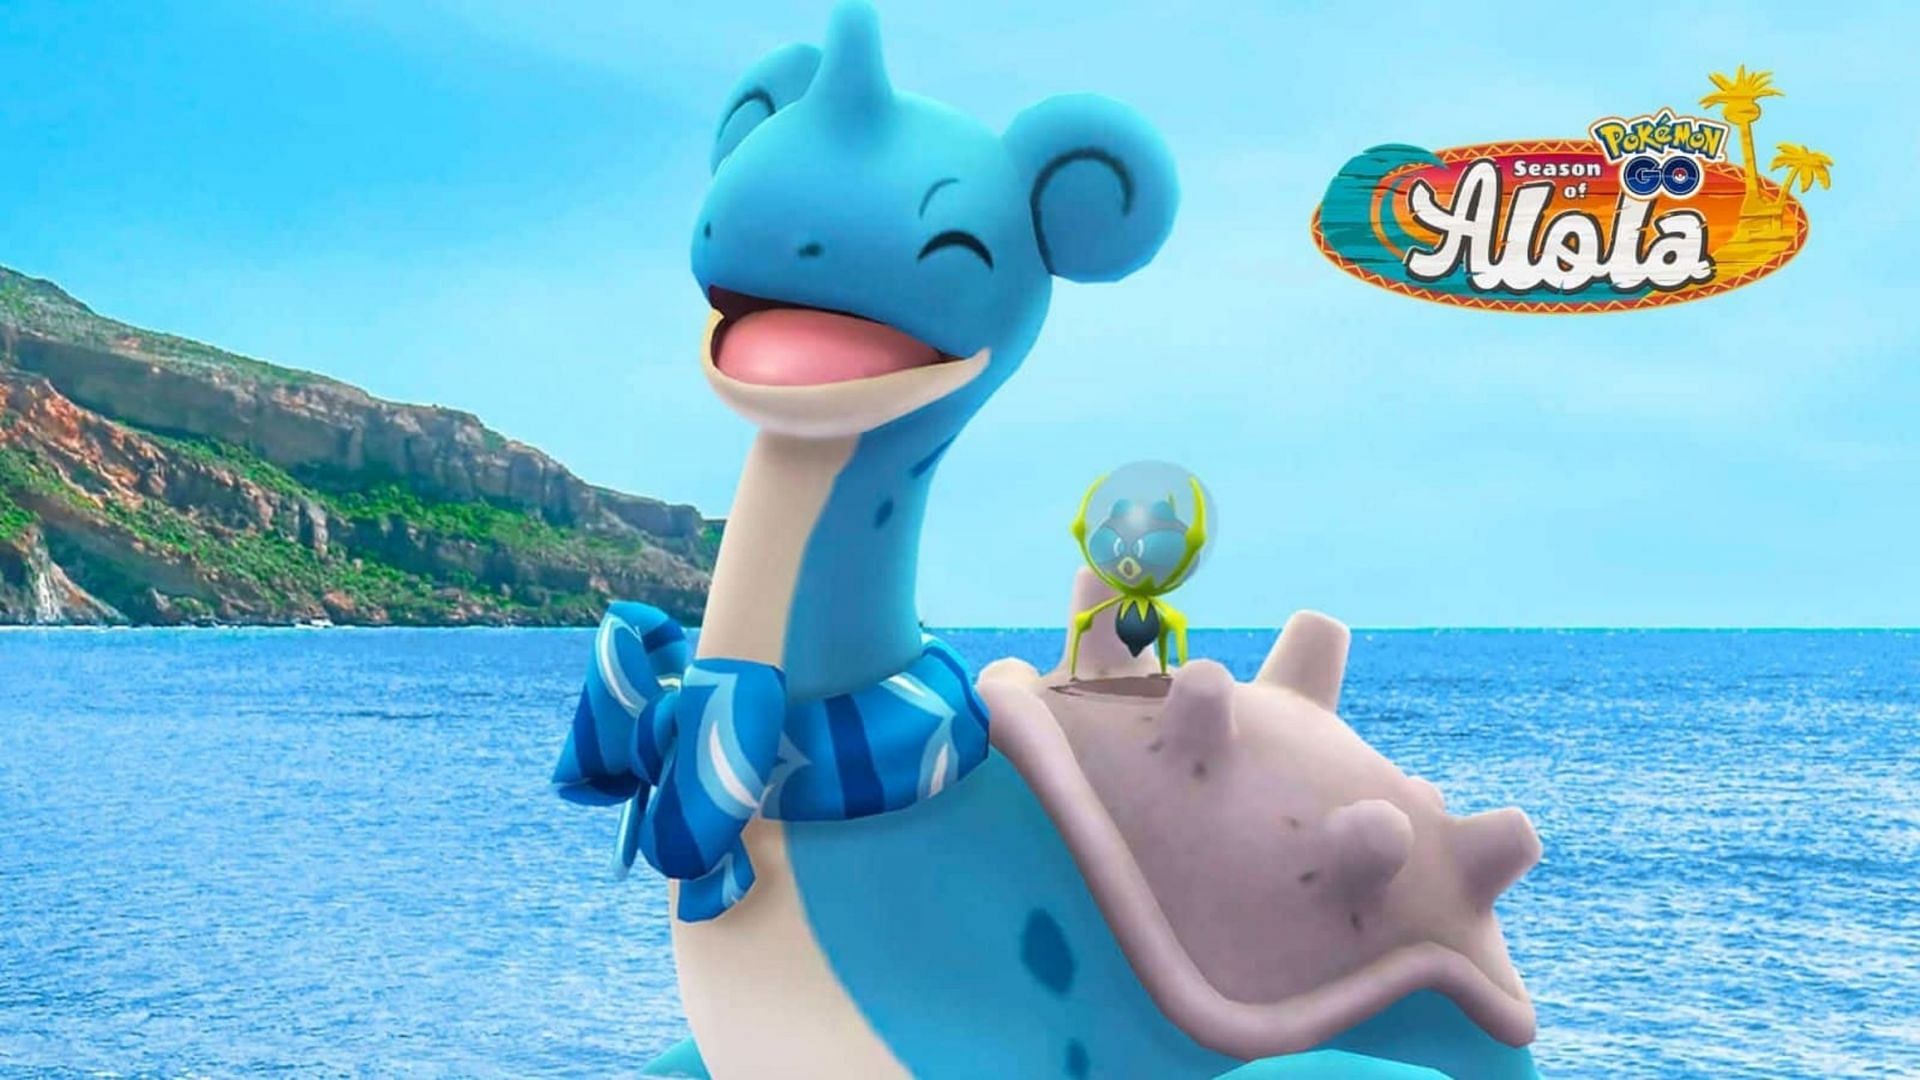 Lapras donning a scarf is now available to catch during the Water Festival (Image via Niantic)